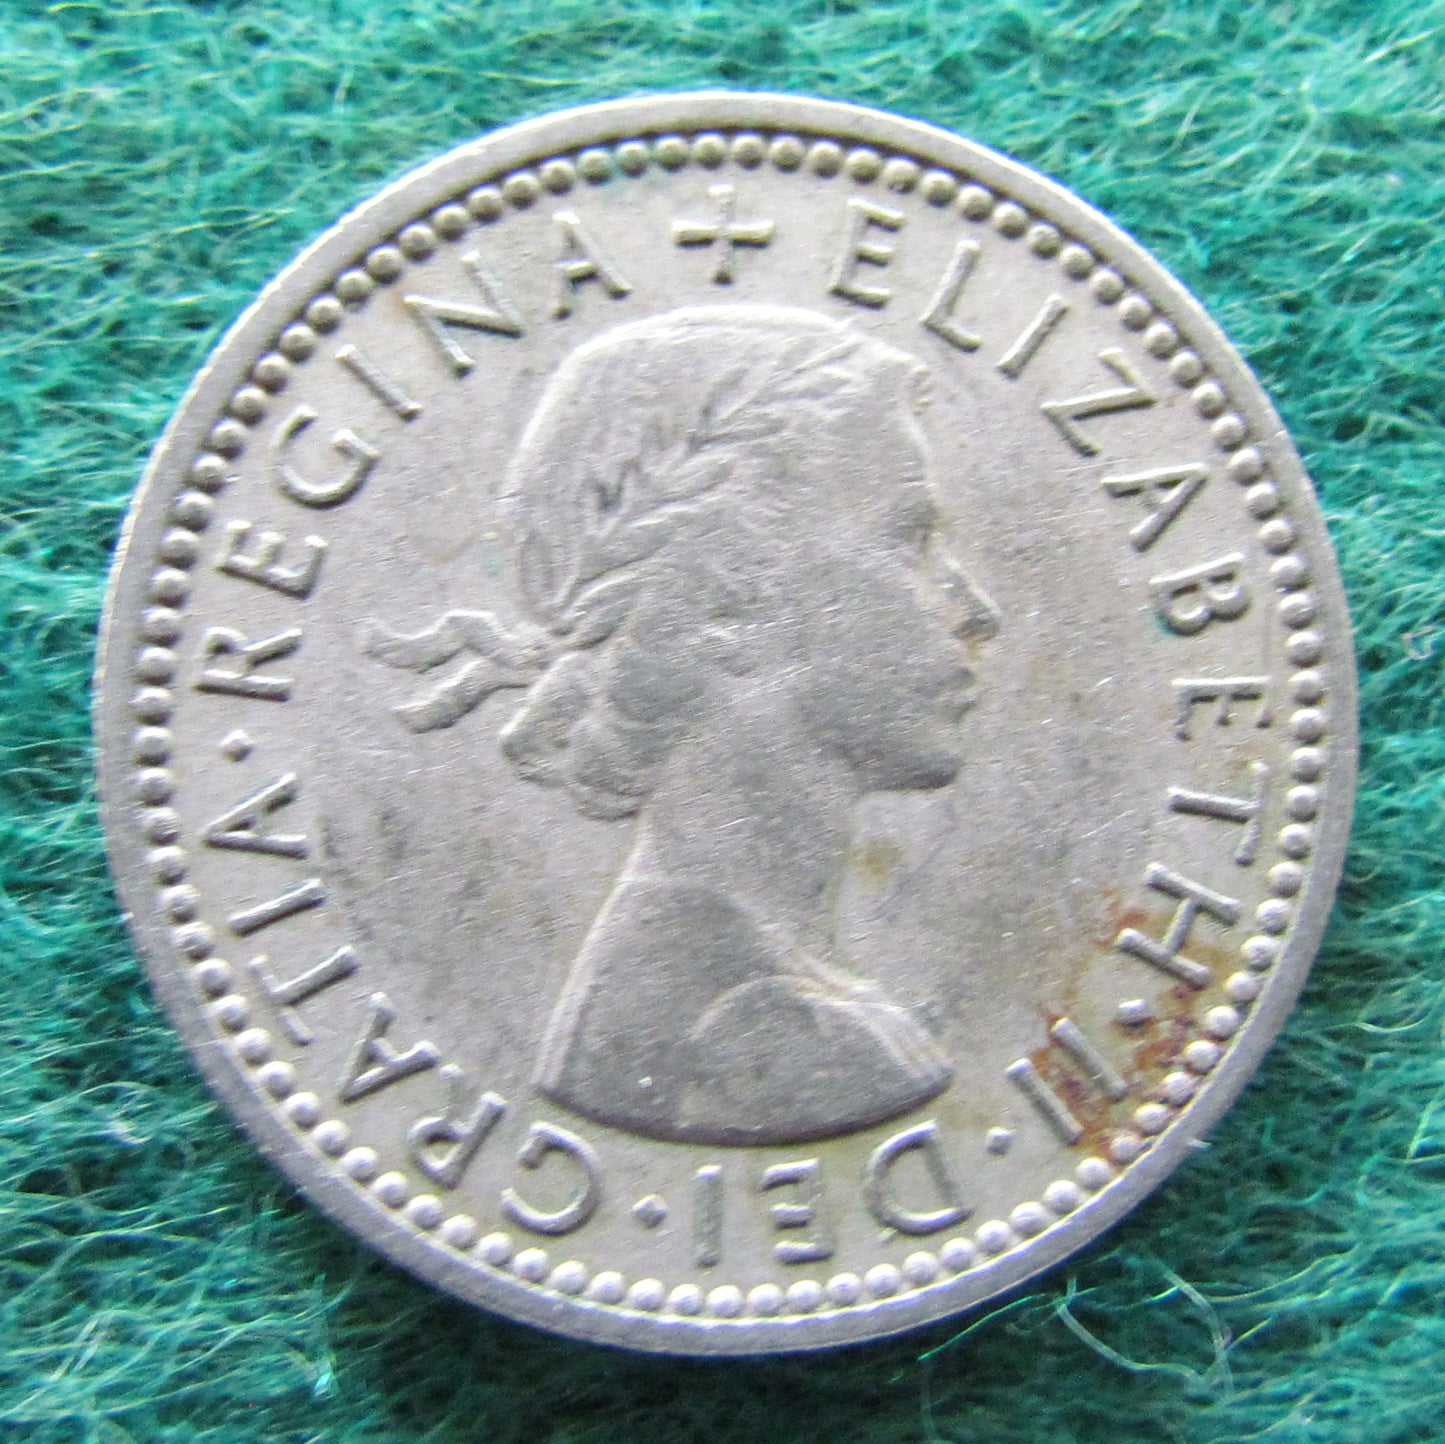 GB British UK English 1960 Sixpence Queen Elizabeth Coin - Circulated